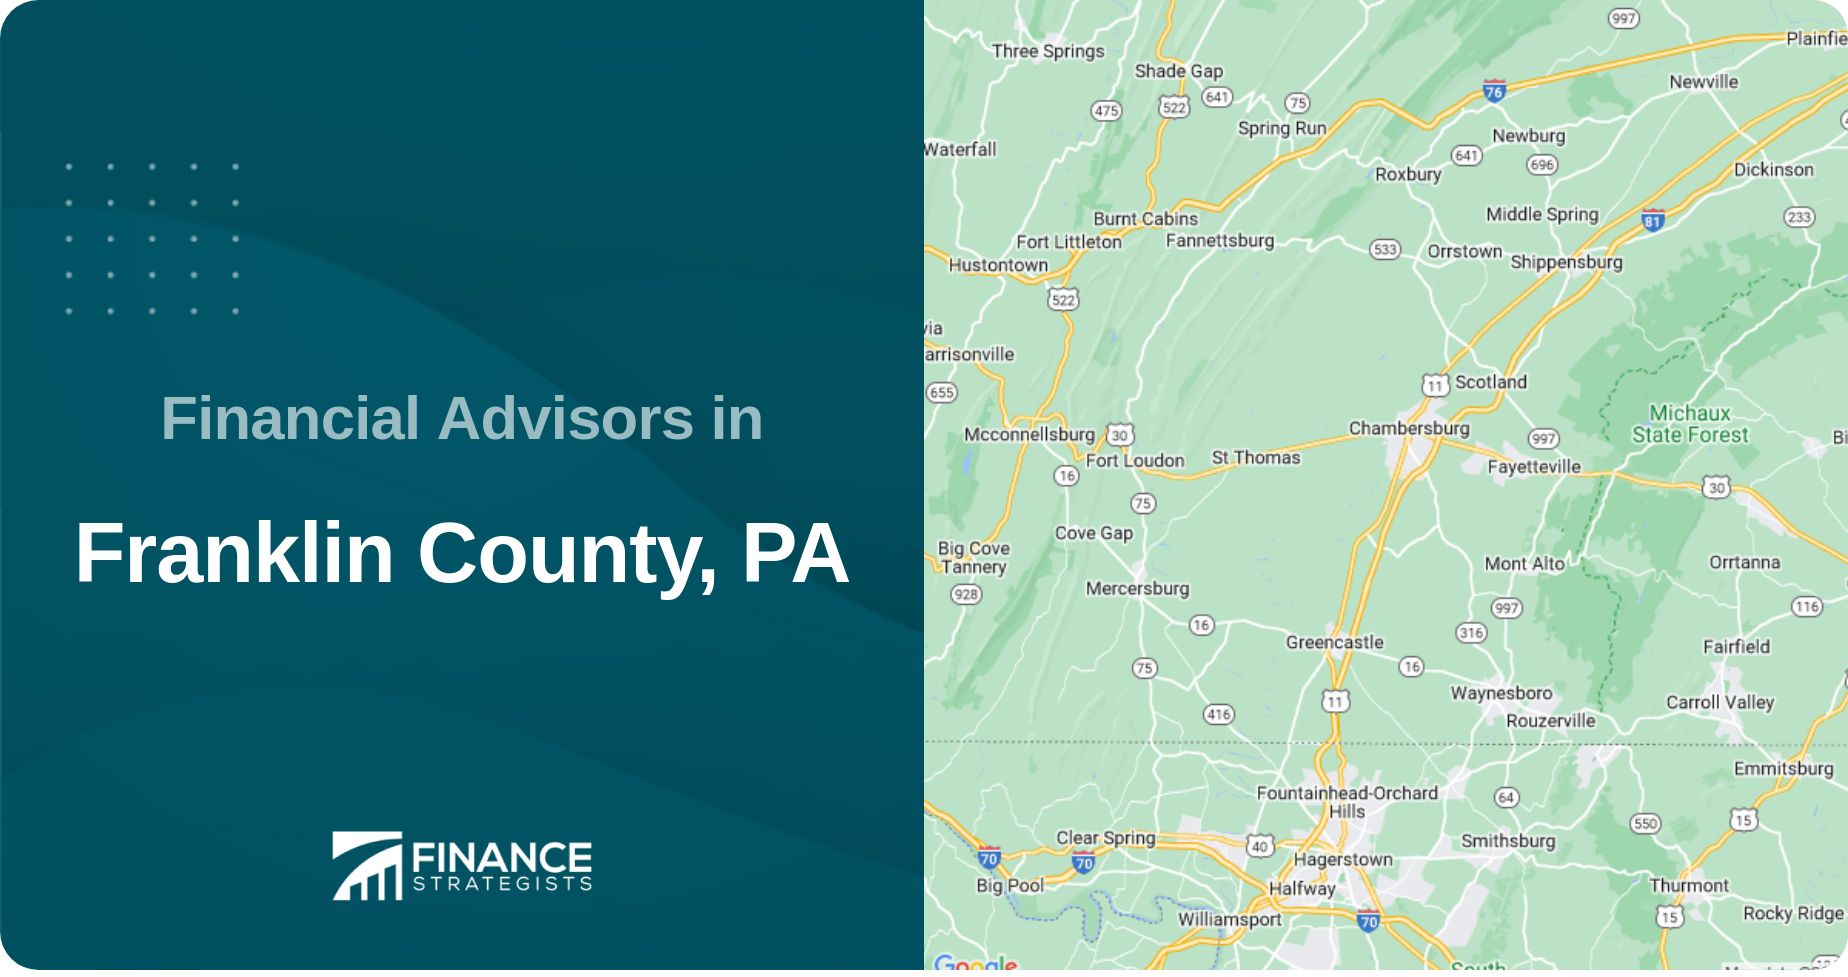 Financial Advisors in Franklin County, PA